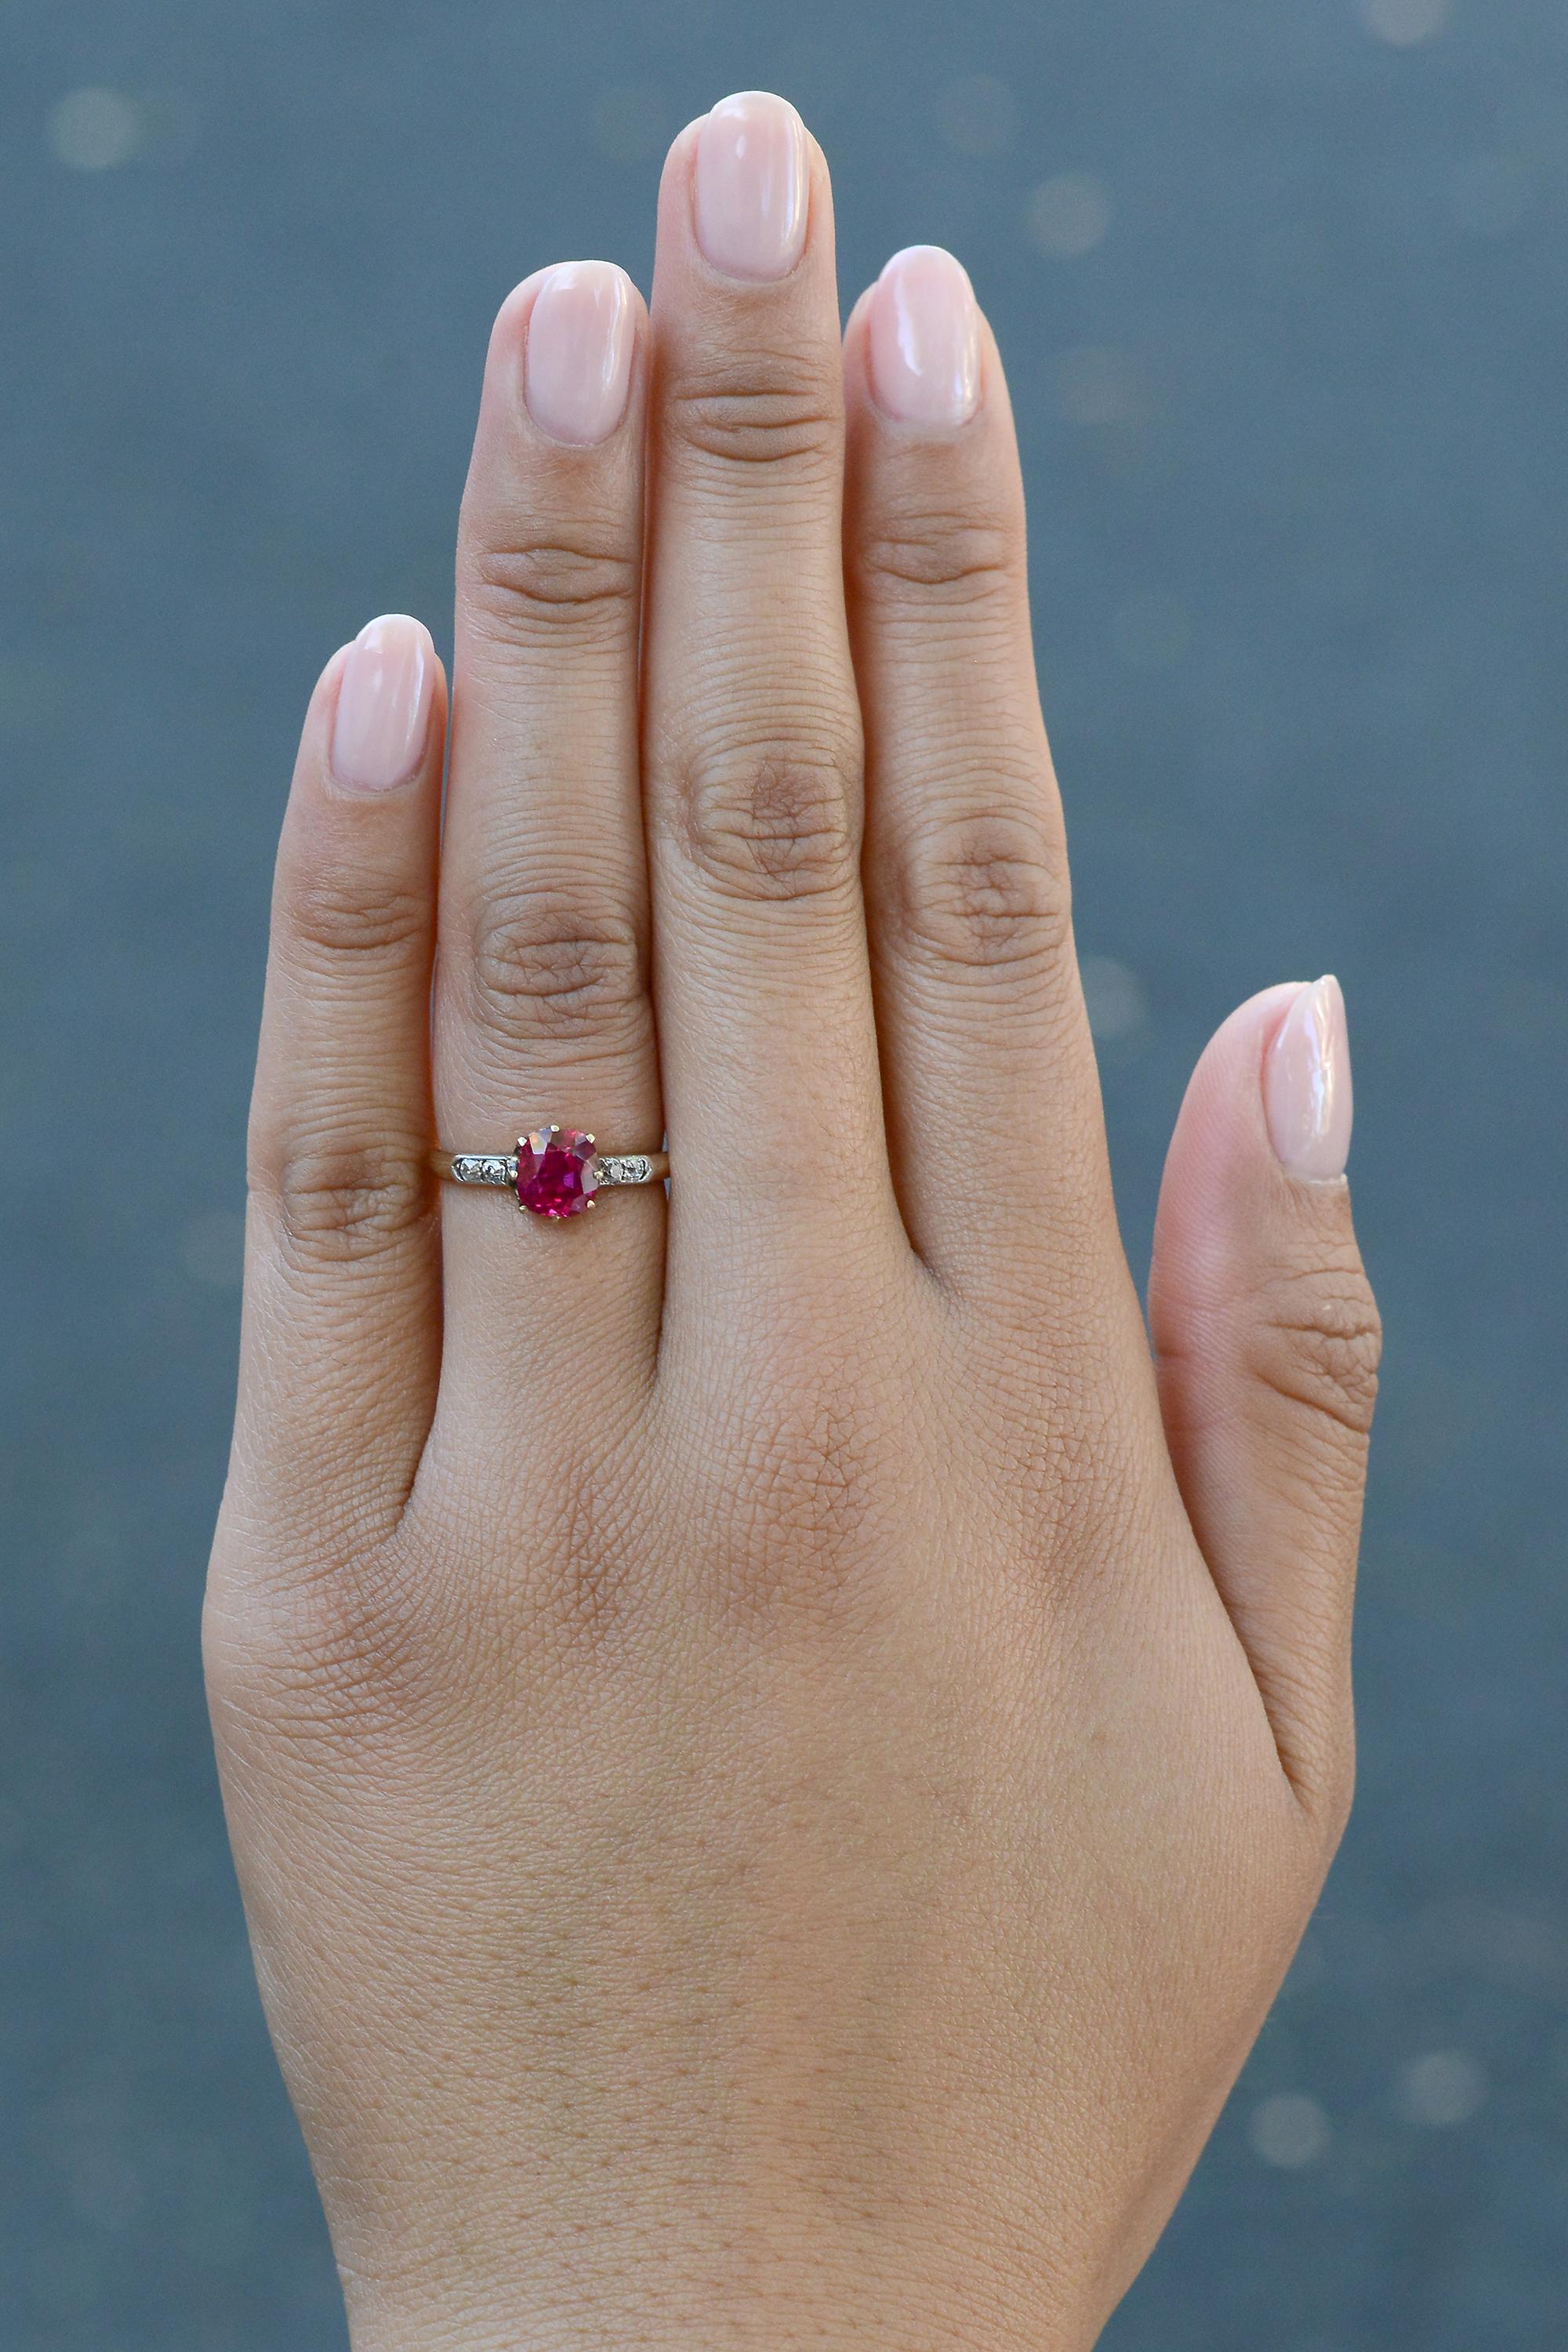 A stunning 1.86 carat Burmese ruby is the focal point of this superb Victorian era ring. The principal stone displays an intense purplish red, certified by American Gemological Laboratories with no indication of heat treatment and origin Burma